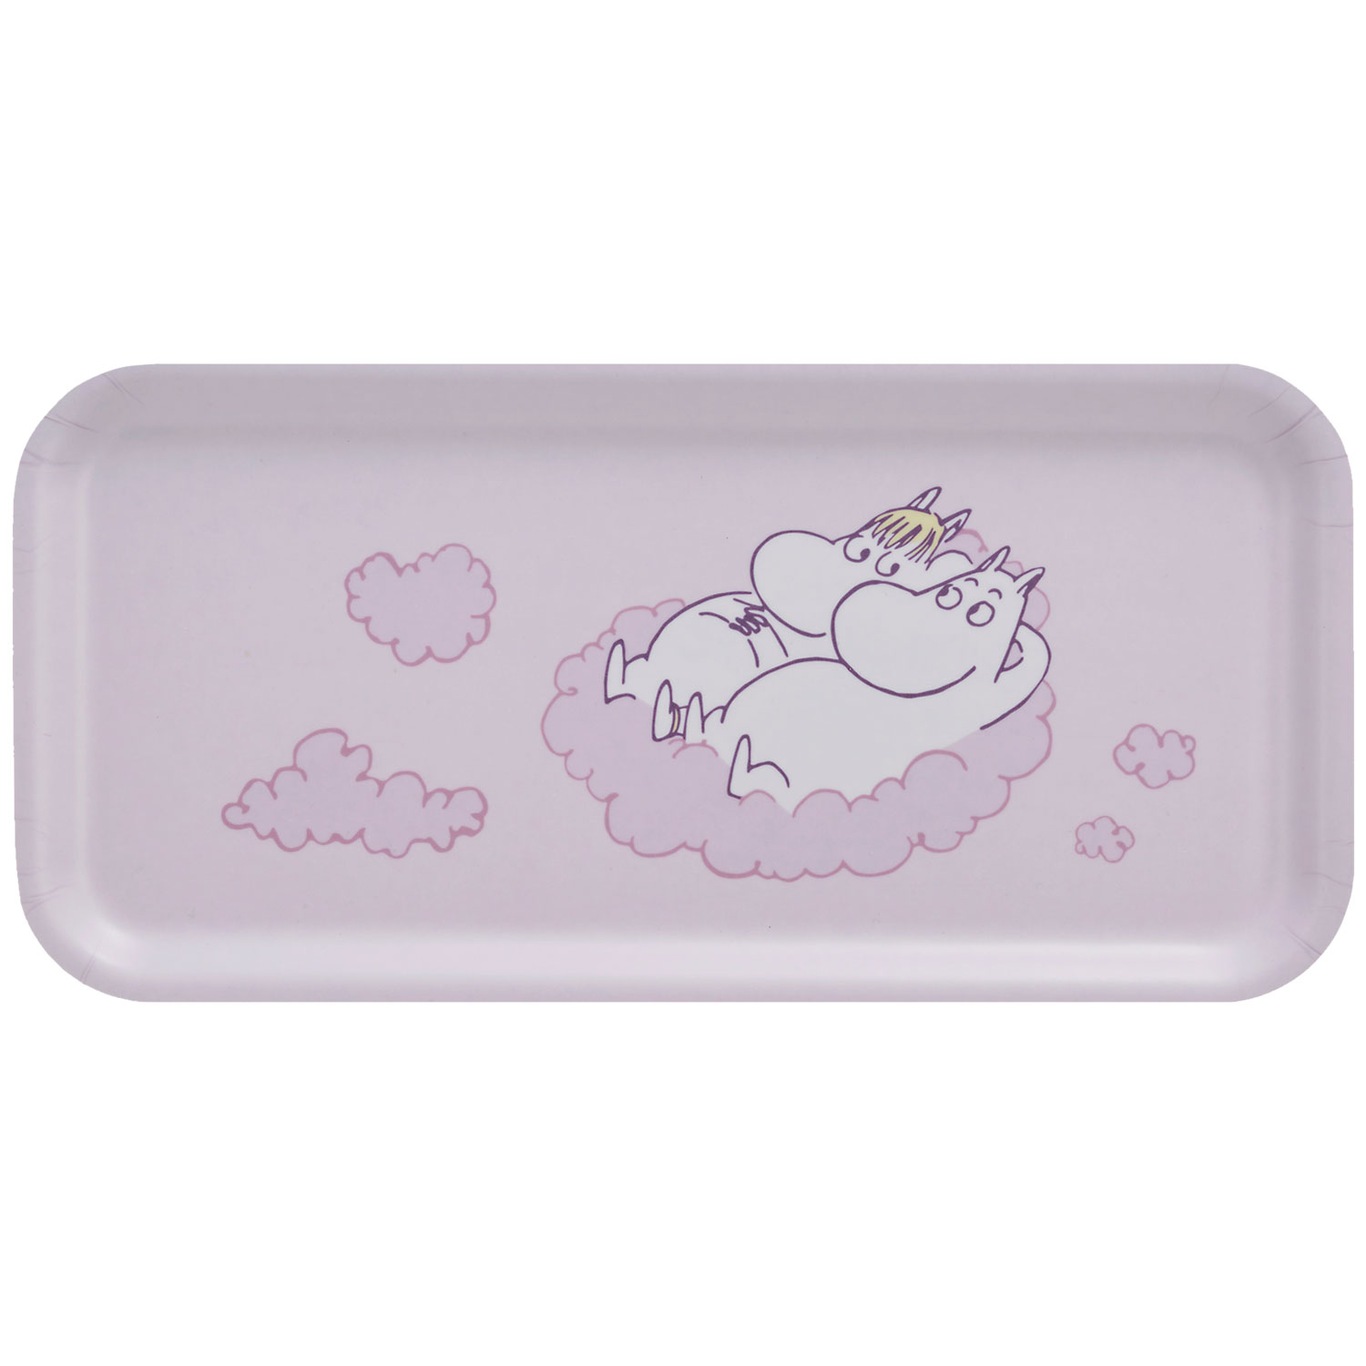 Moomin Tray 13x27 cm, The Clouds